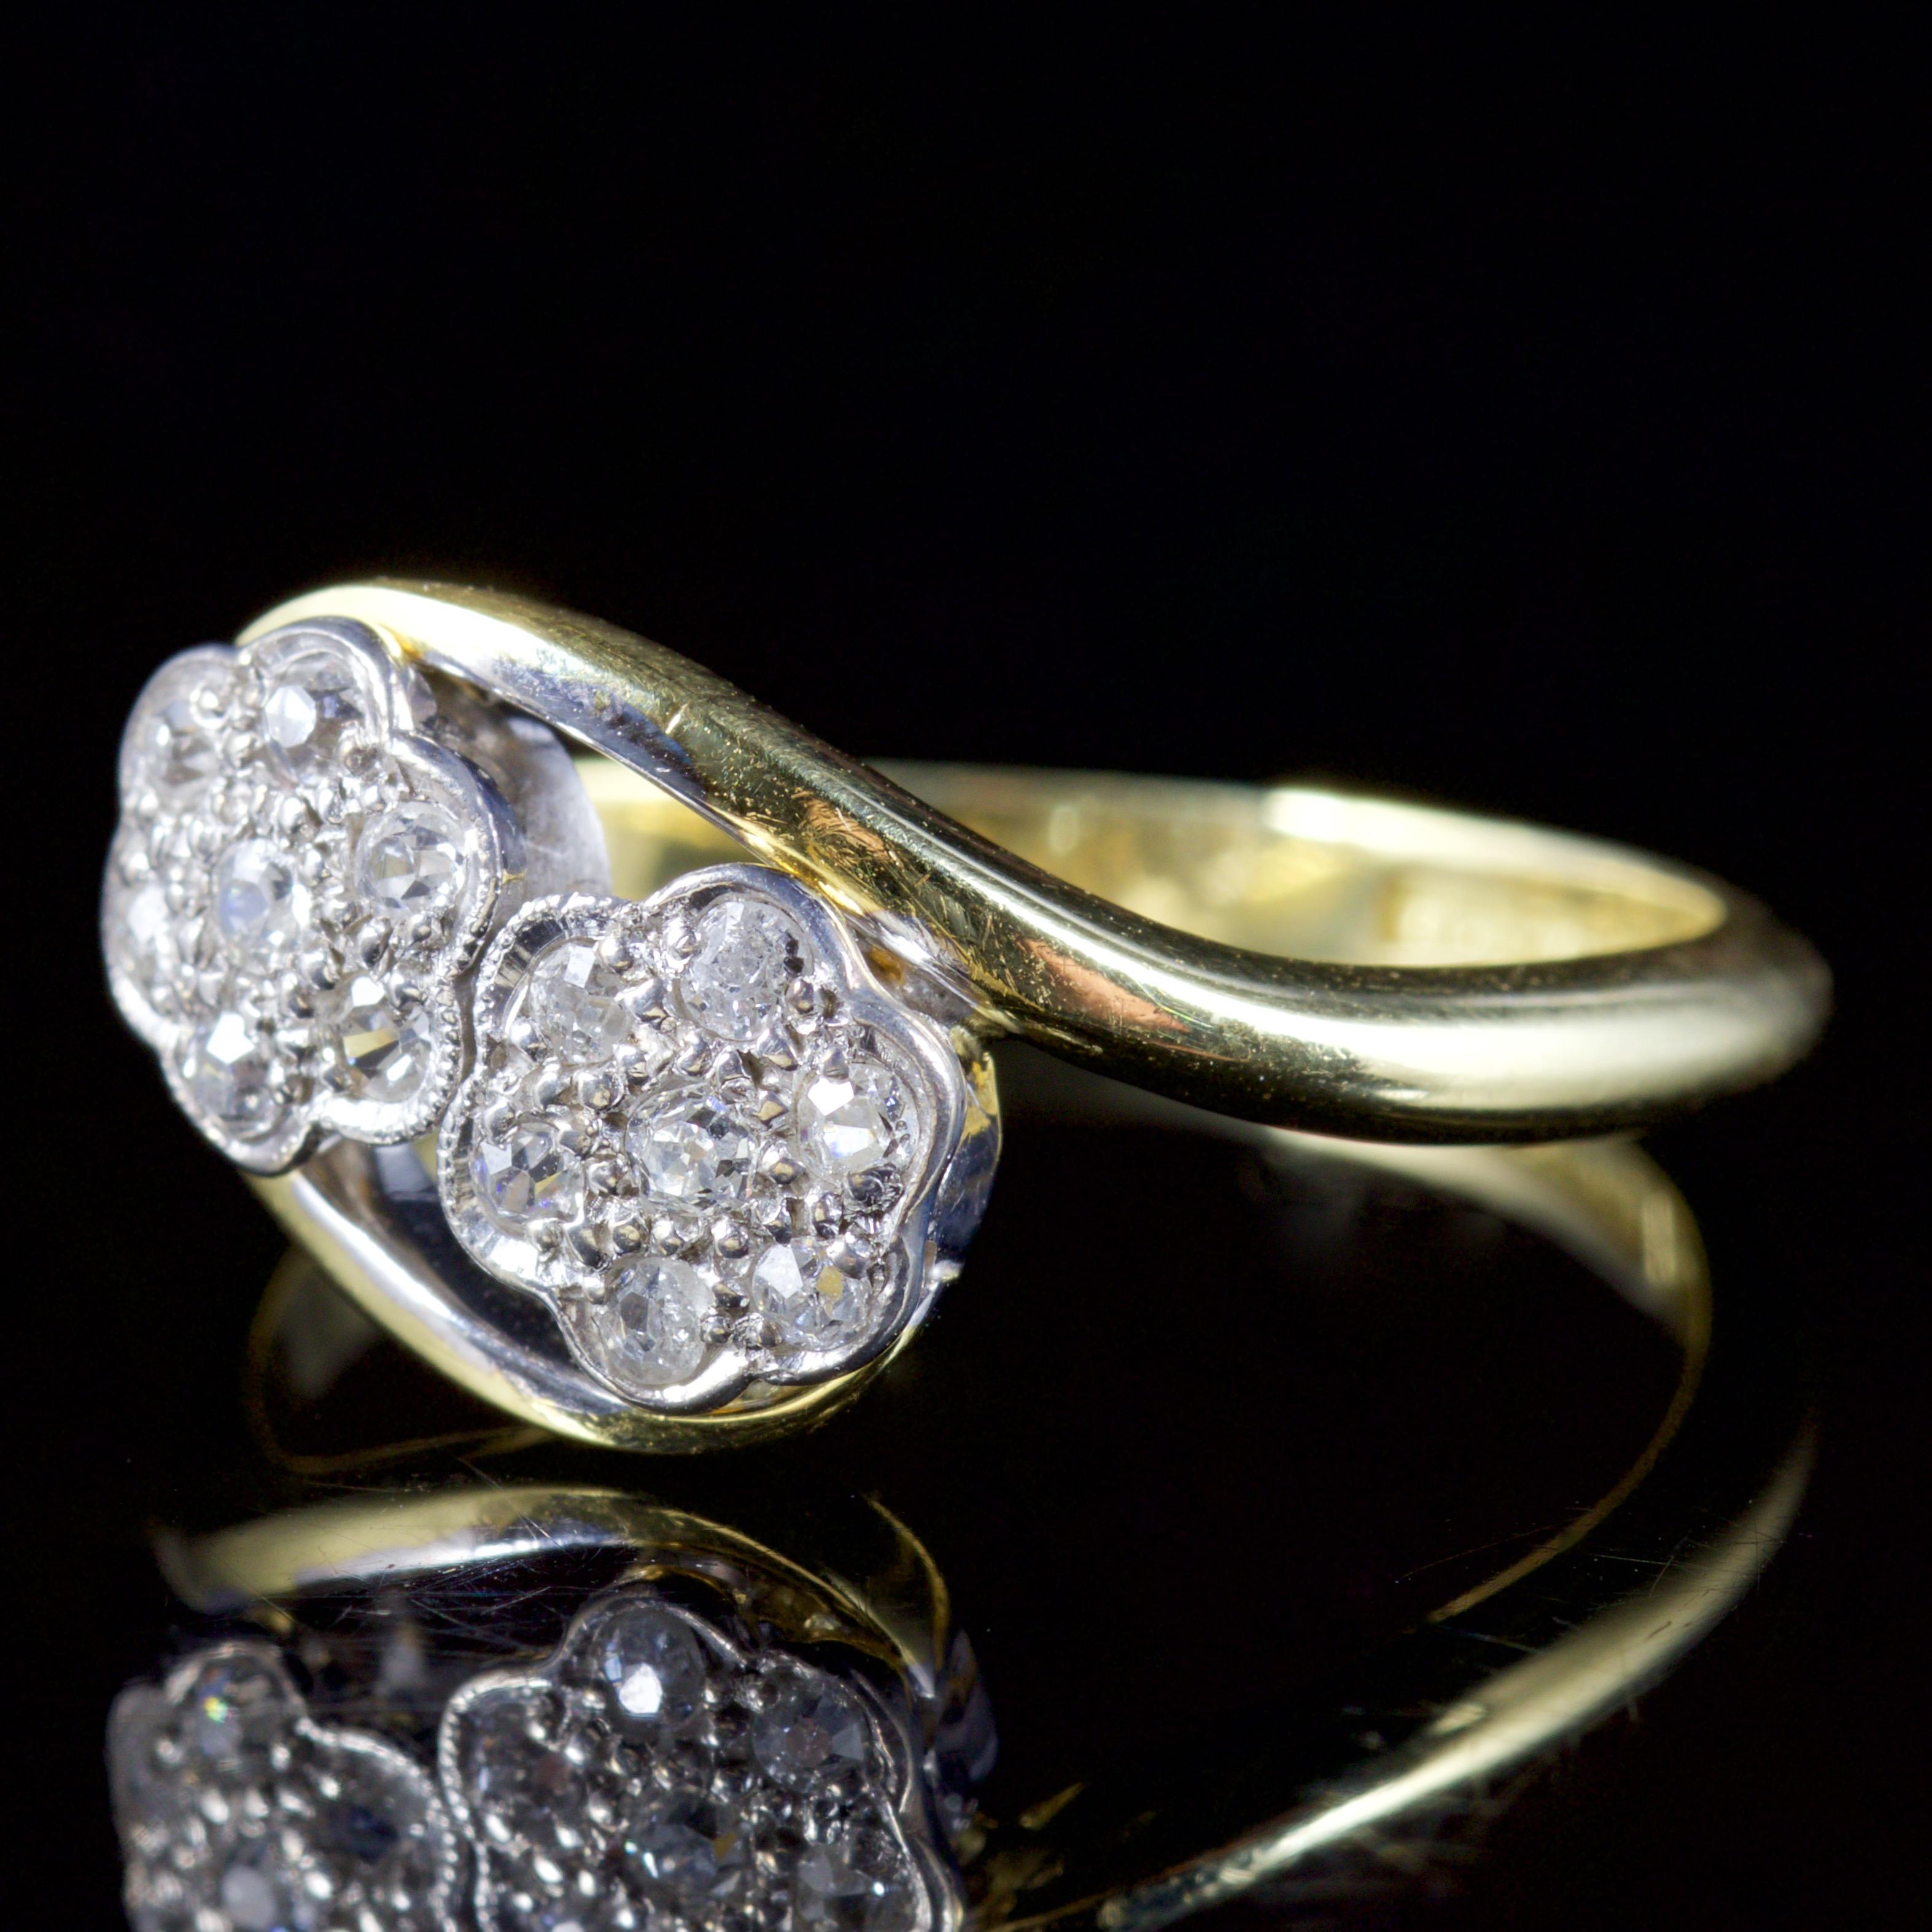 This truly wonderful Edwardian Diamond twist ring is set in 18ct Gold, Circa 1915.

The exquisite ring is decorated in a cluster of glistening Diamonds, set in a Platinum gallery.

There is approx 0.50ct in total, the Diamonds show a superb cut,